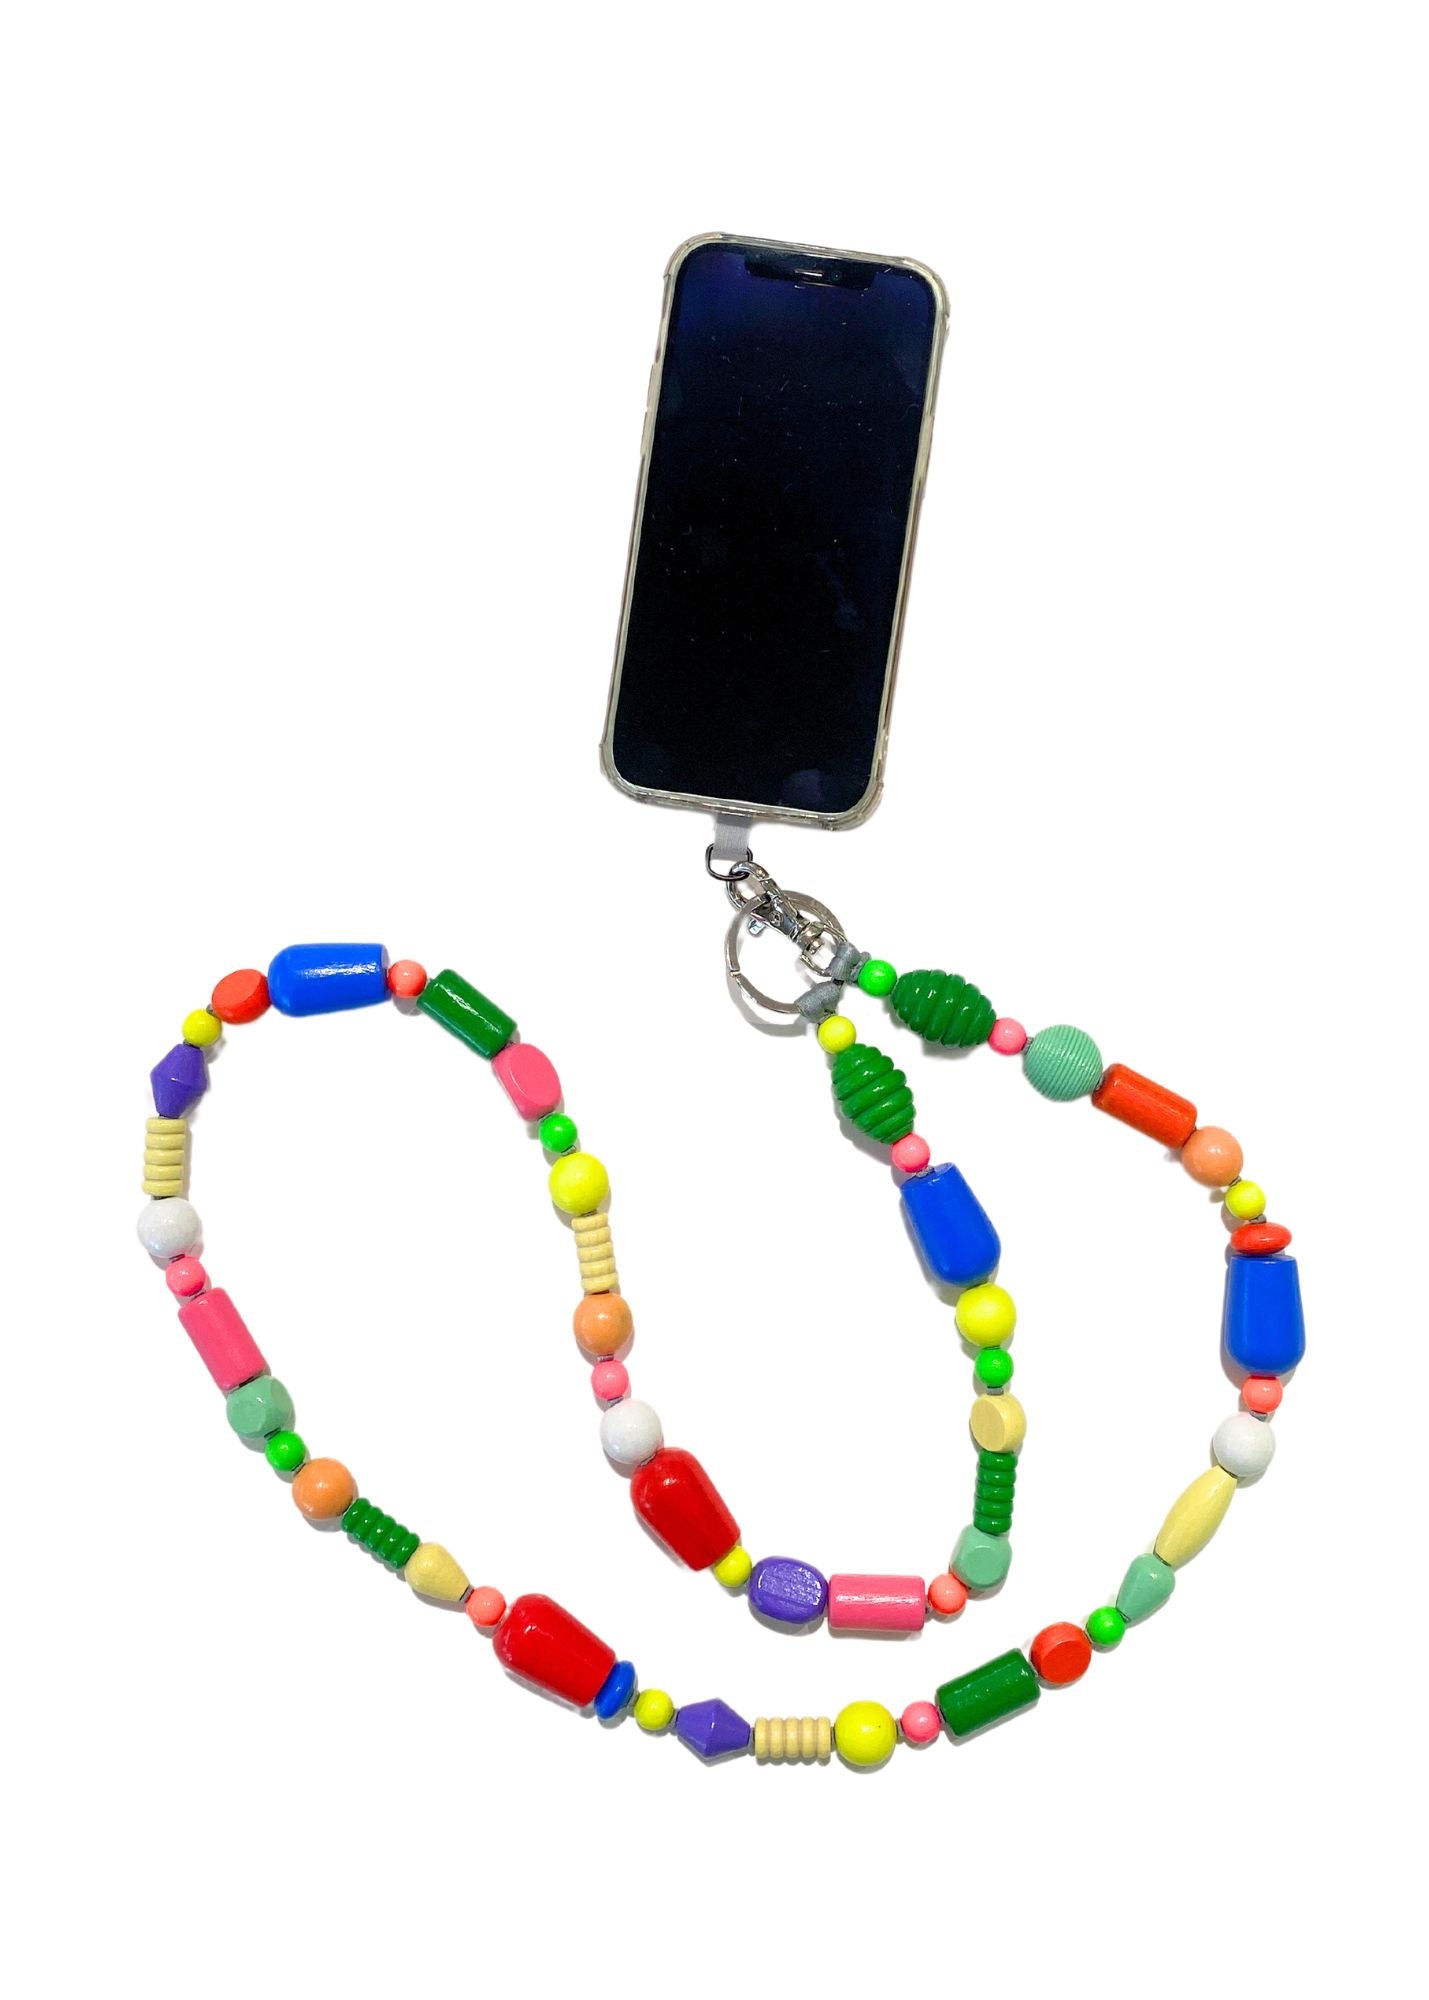 INA SEIFART BUNTER MIX BEADED PHONE NECKLACE AND ADAPTER